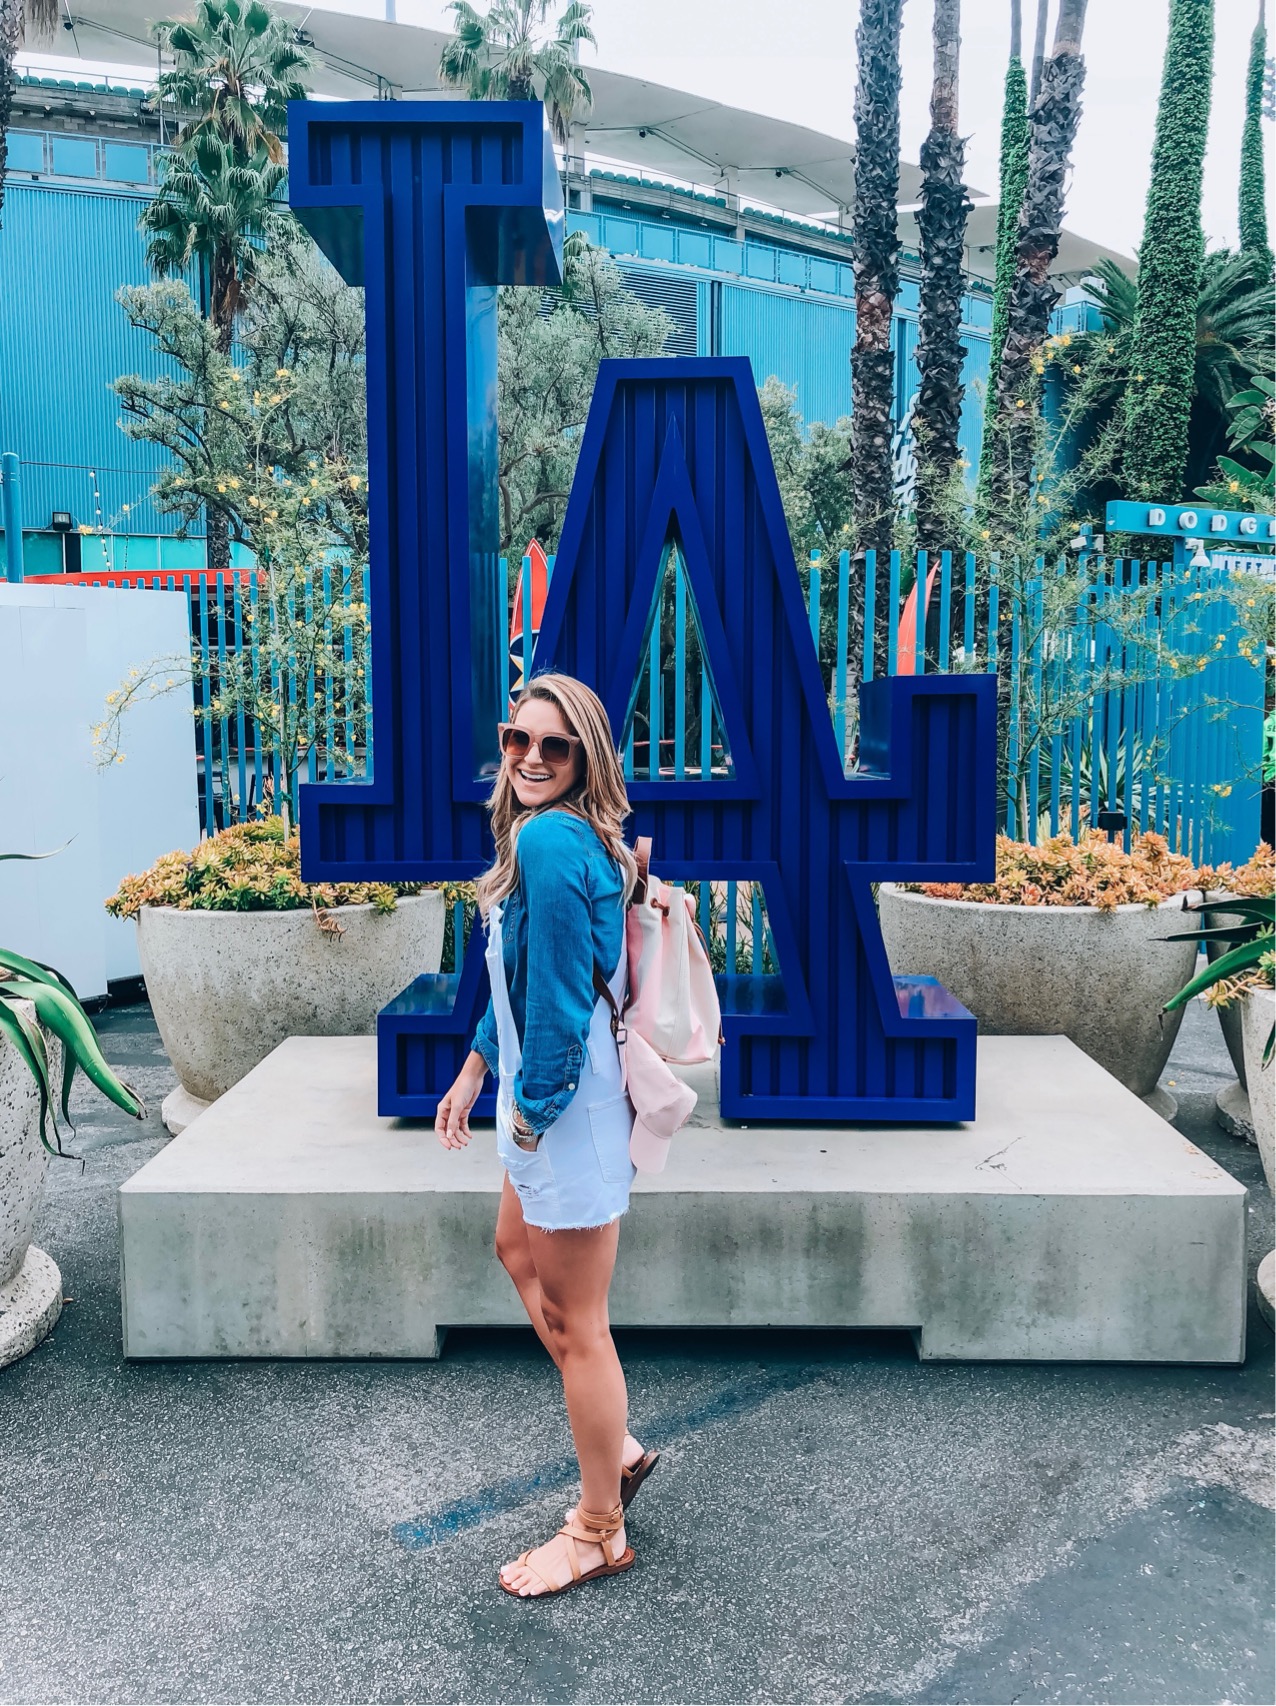 LA Dodgers Outfit - SHOP DANDY  A florida based style and beauty